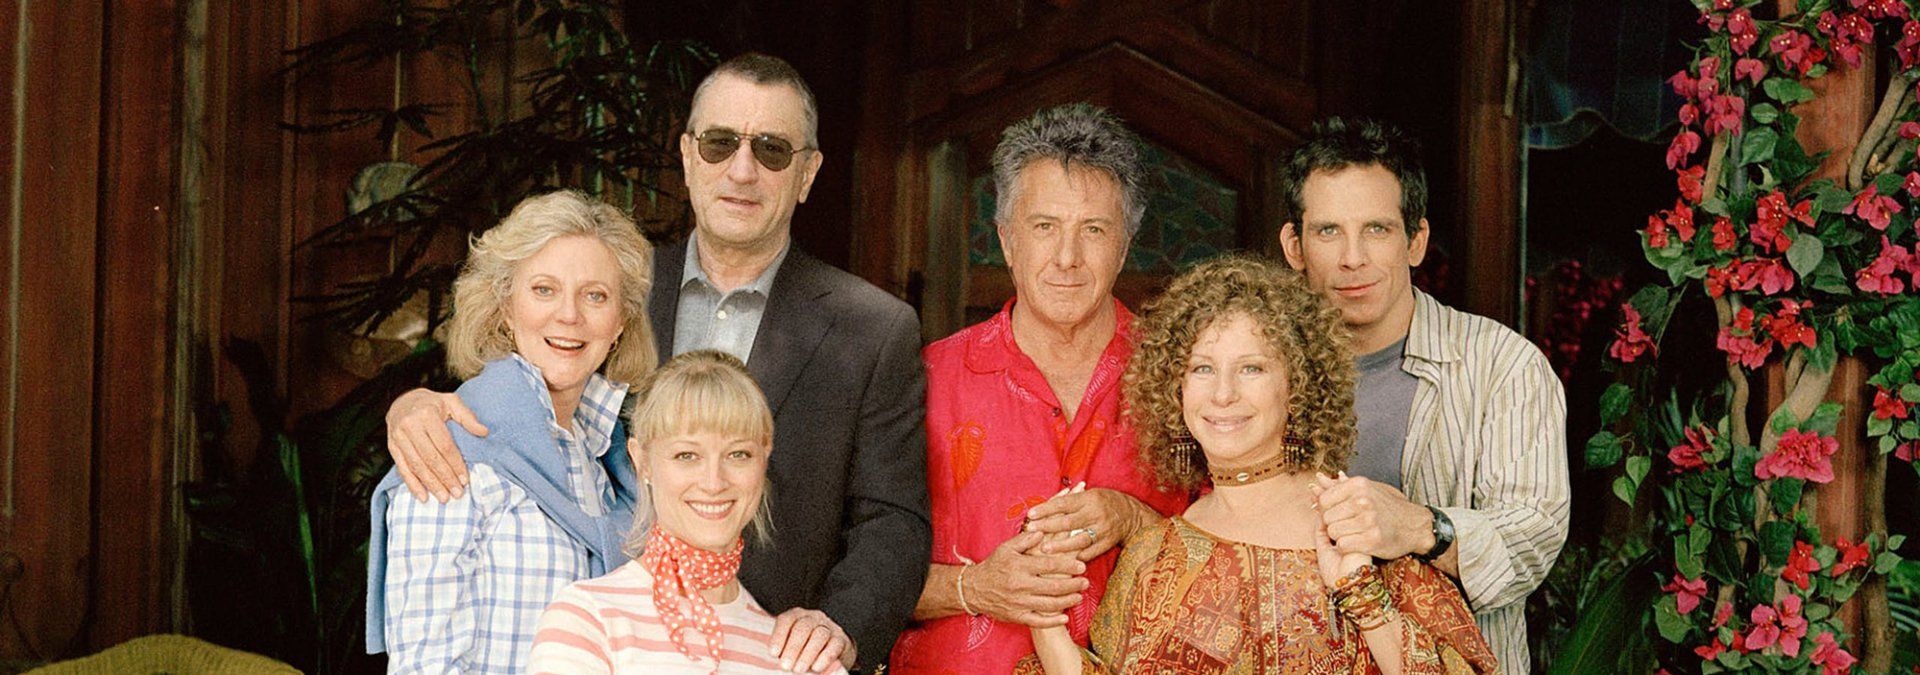 The entire cast of Meet the Fockers